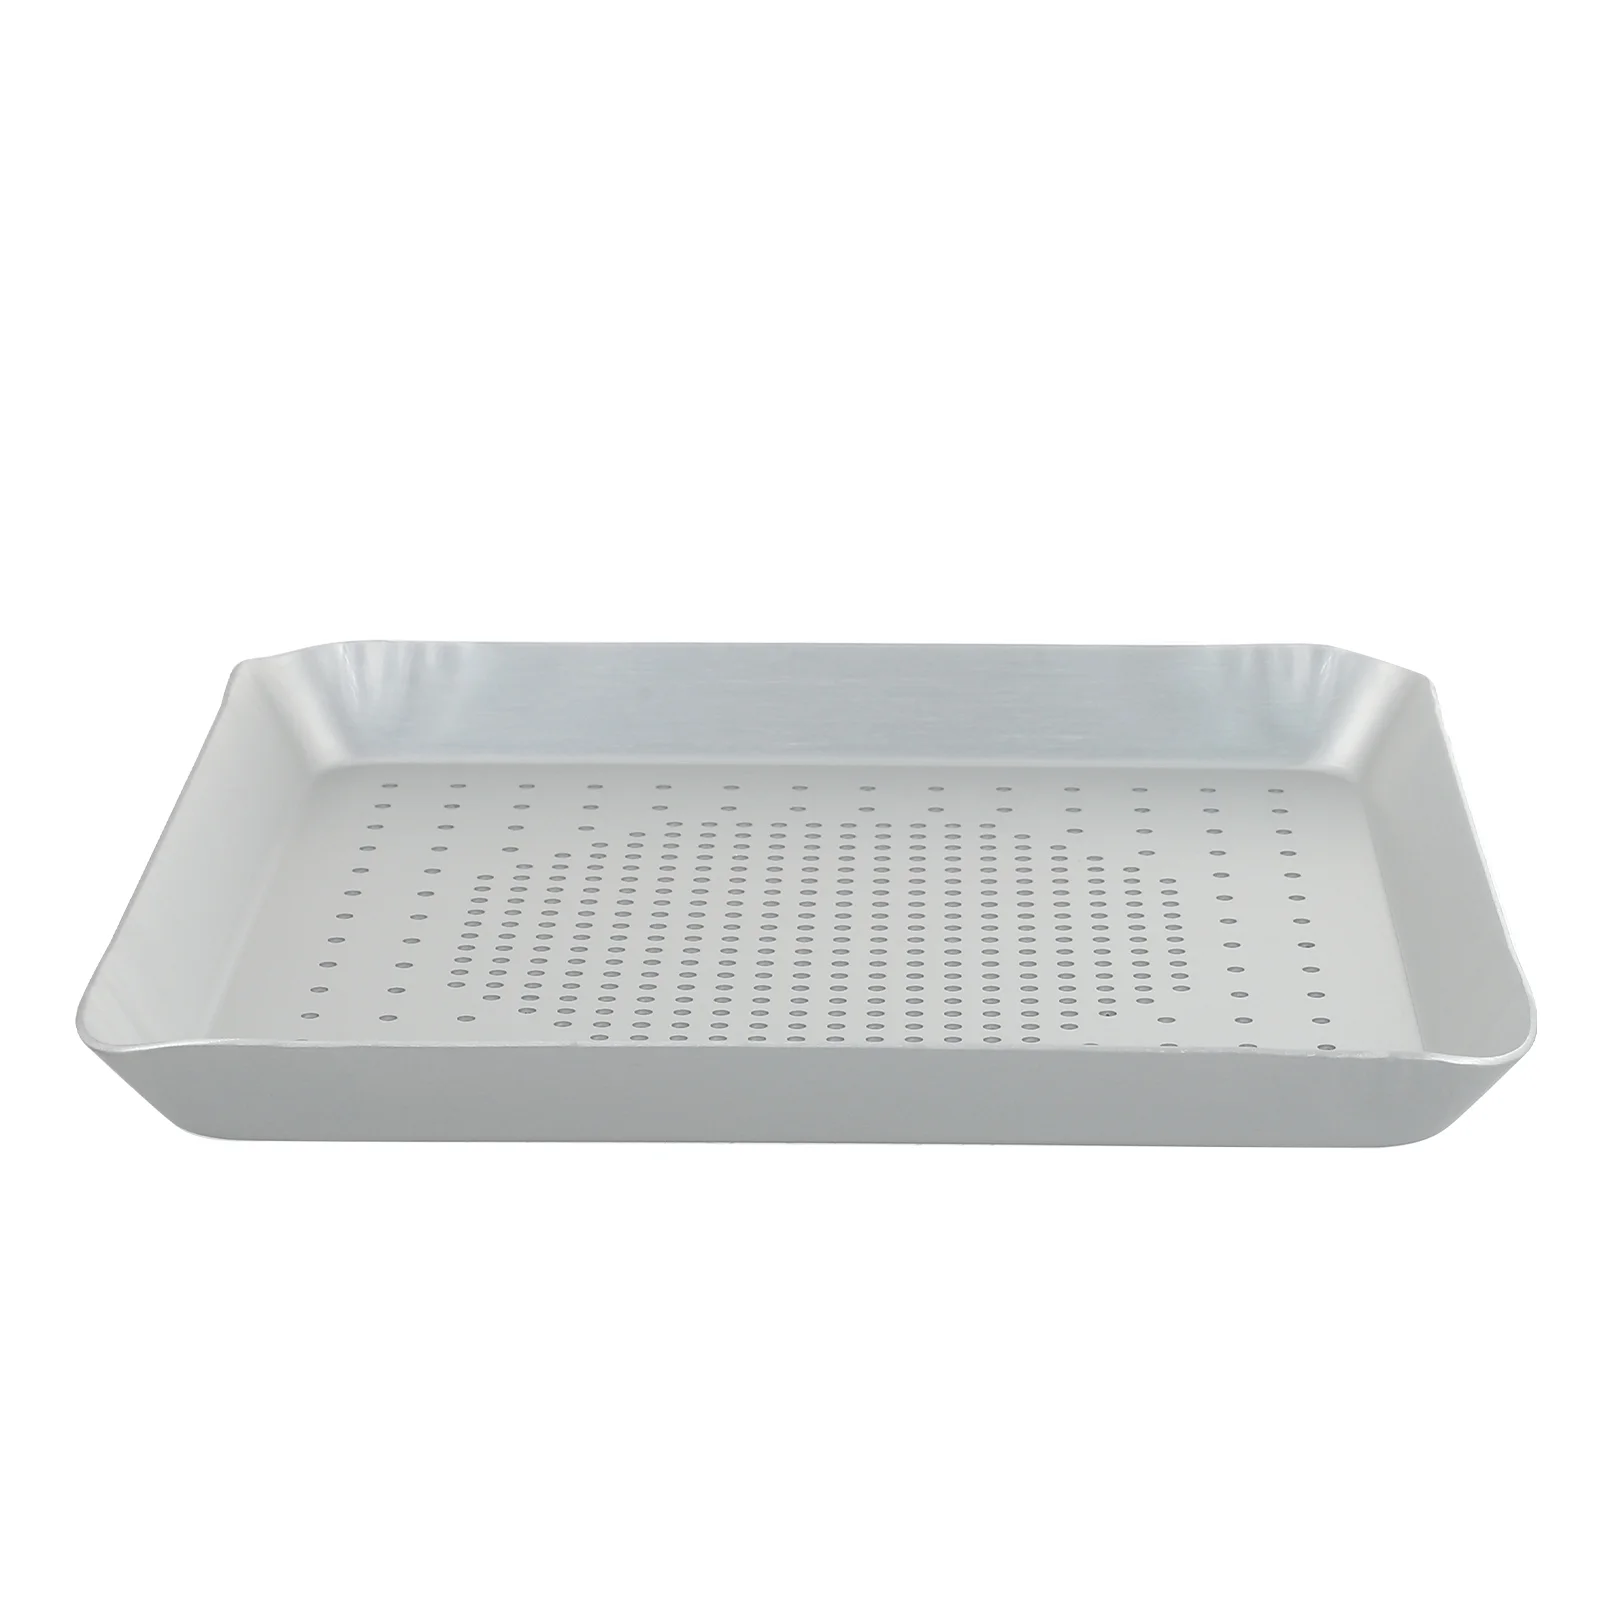 

Pizza Pan Baking Tray Square Oven Holes Crisper Non Stick Plate Mesh Bakeware Perforated Cake Pie Kitchen Screen Sheet Steel